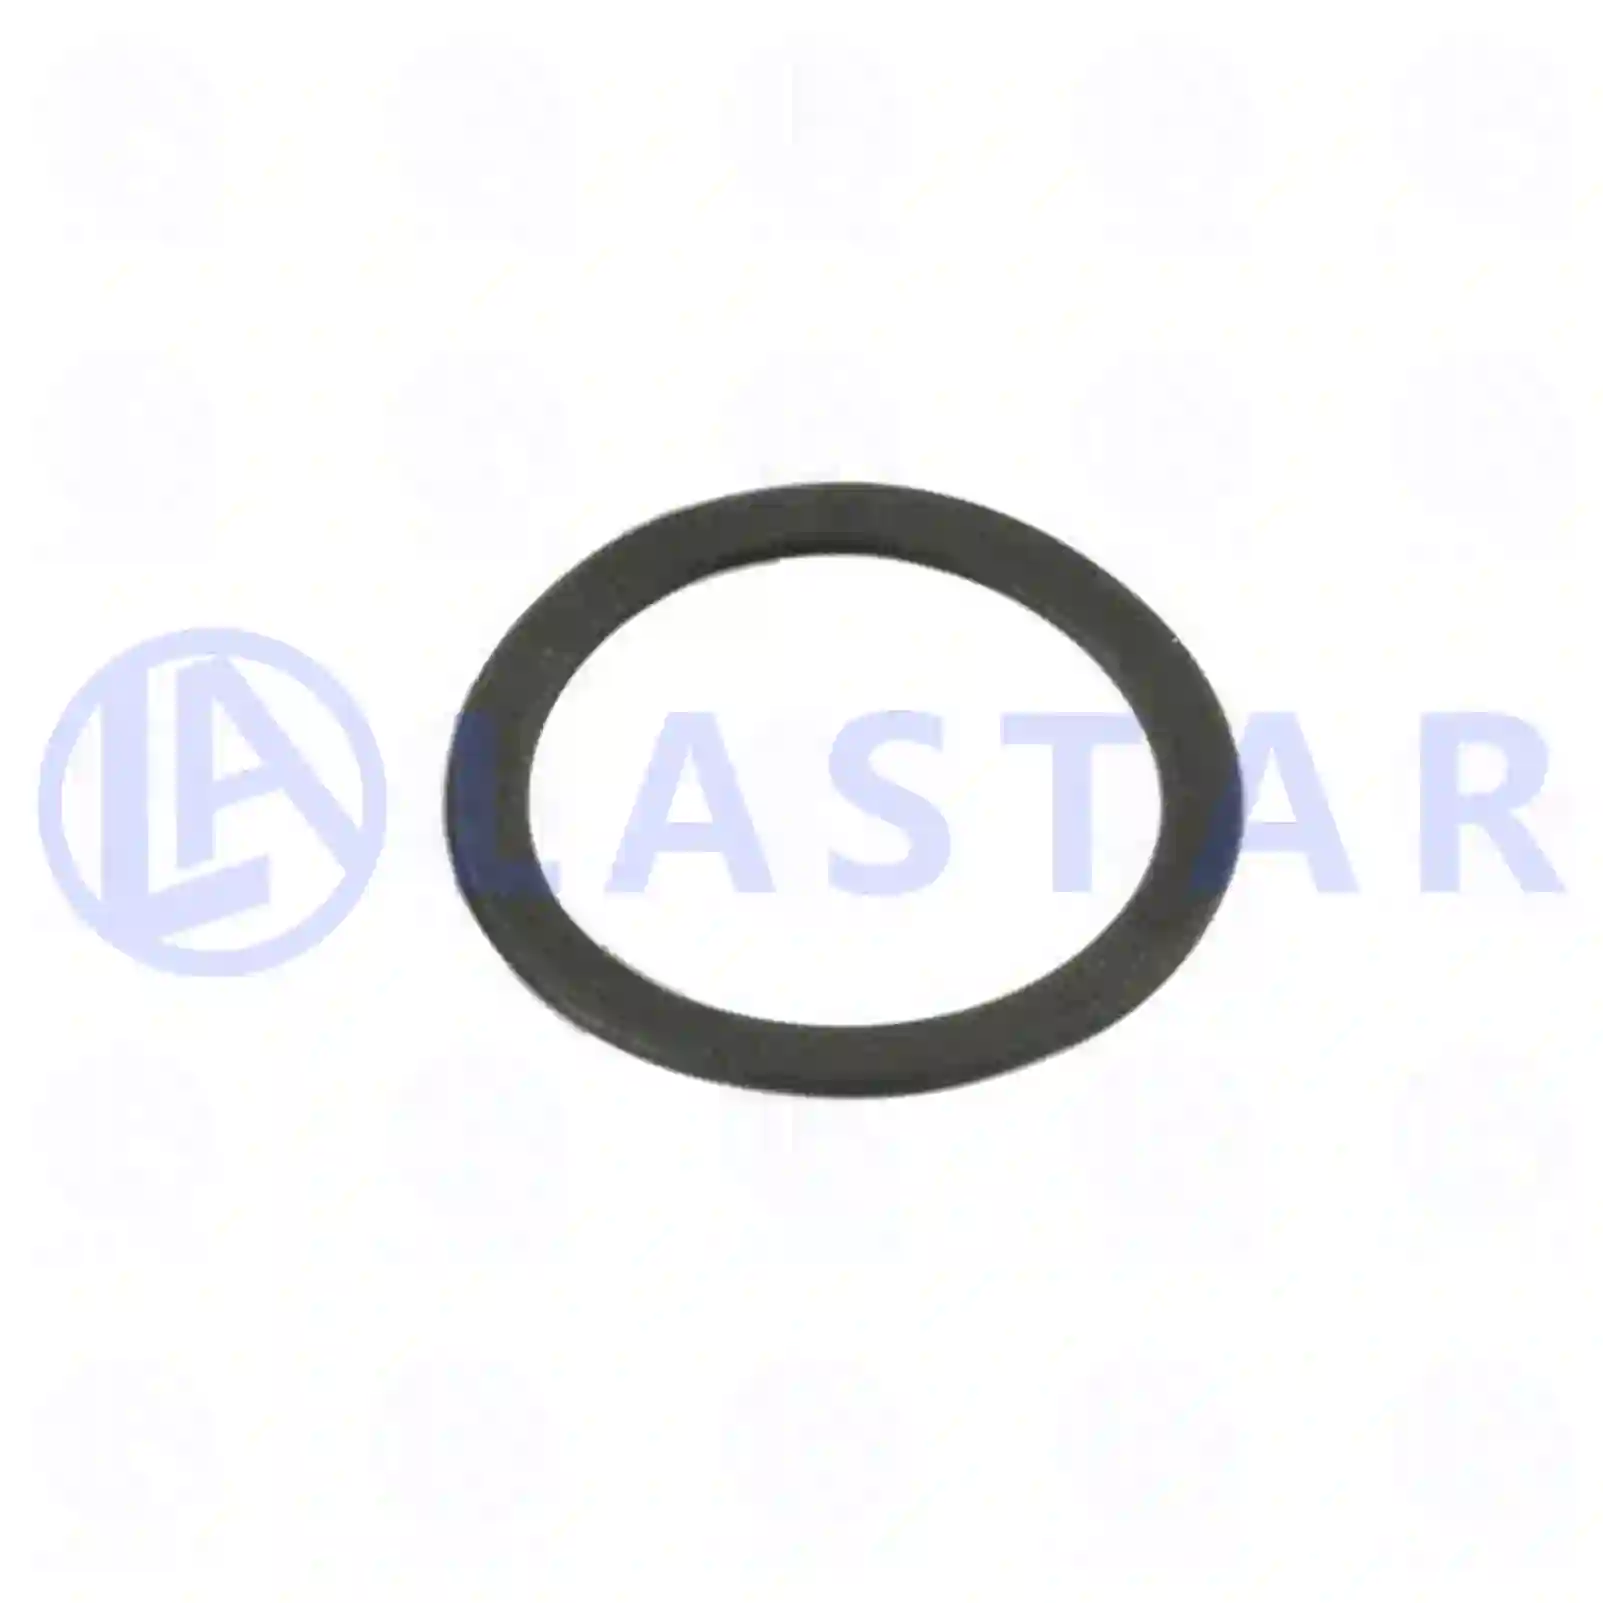 Seal ring, 77703502, 7420365079, 20365079, ||  77703502 Lastar Spare Part | Truck Spare Parts, Auotomotive Spare Parts Seal ring, 77703502, 7420365079, 20365079, ||  77703502 Lastar Spare Part | Truck Spare Parts, Auotomotive Spare Parts